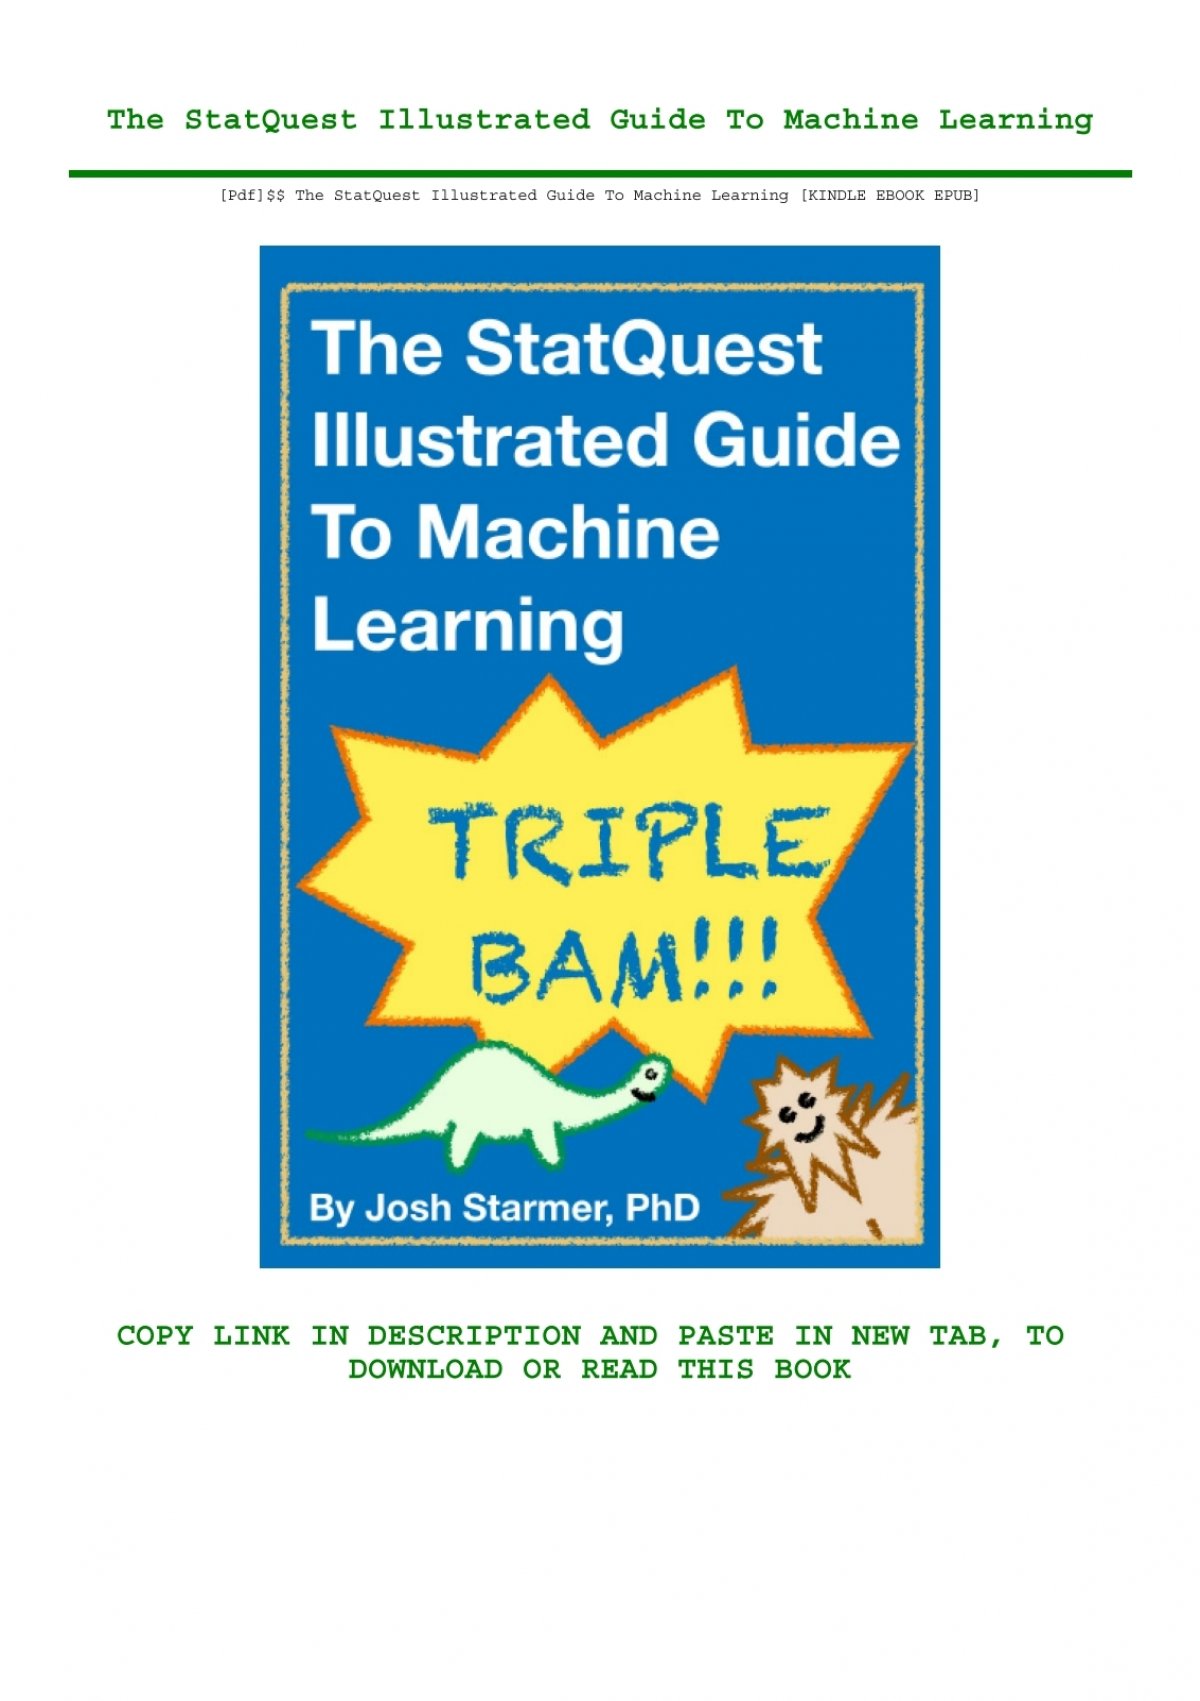 the statquest illustrated guide to machine learning pdf free download